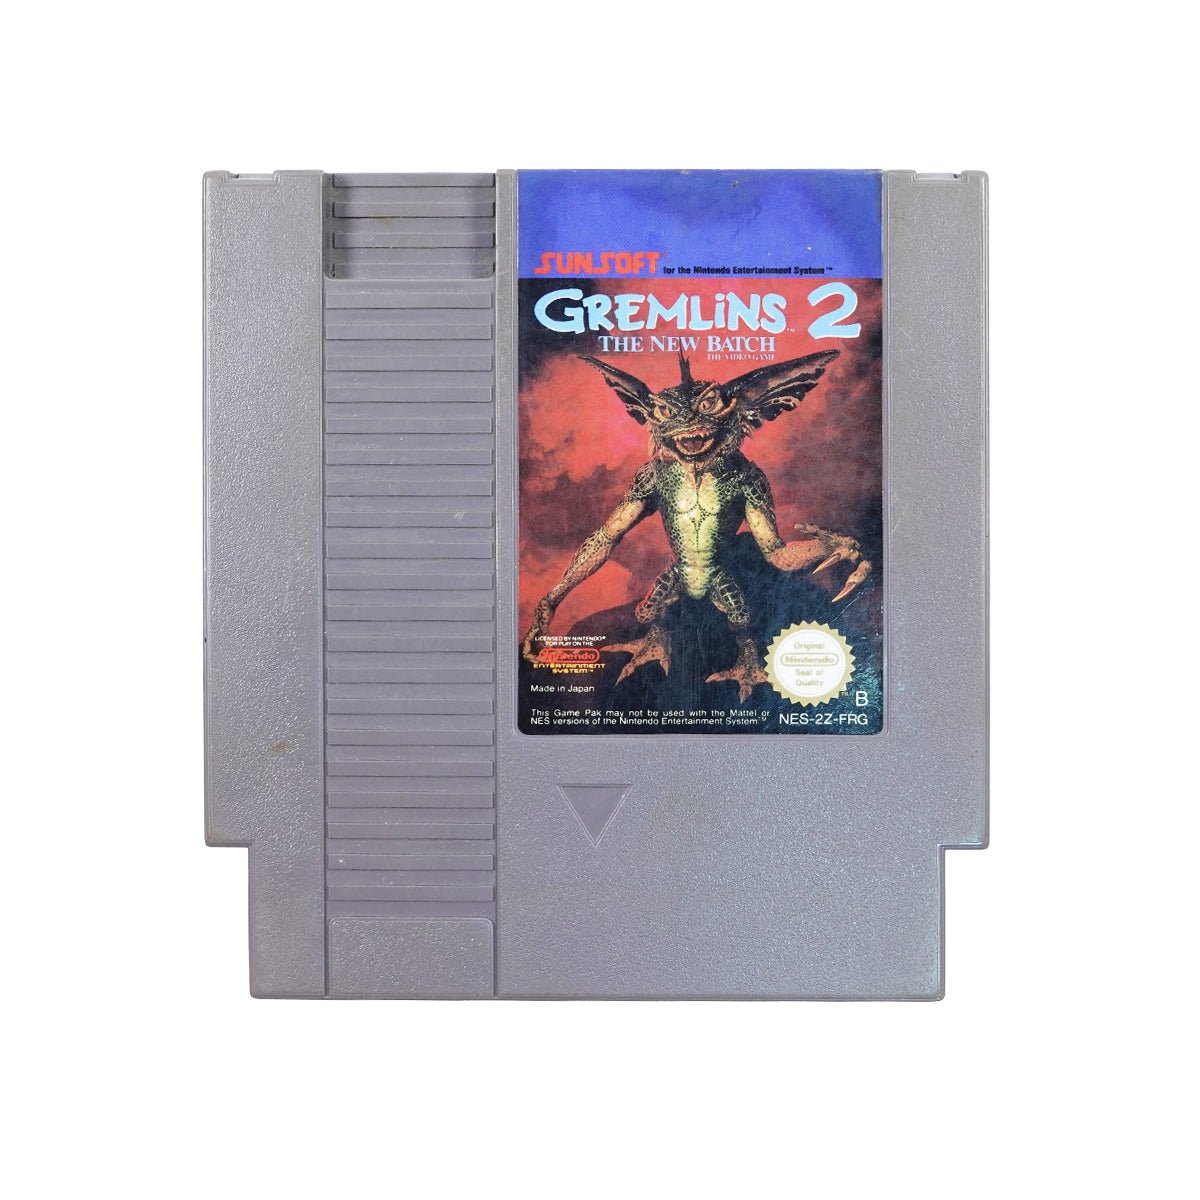 (Pre-Owned) Gremlins 2: The New Batch - Nintendo NES - Store 974 | ستور ٩٧٤